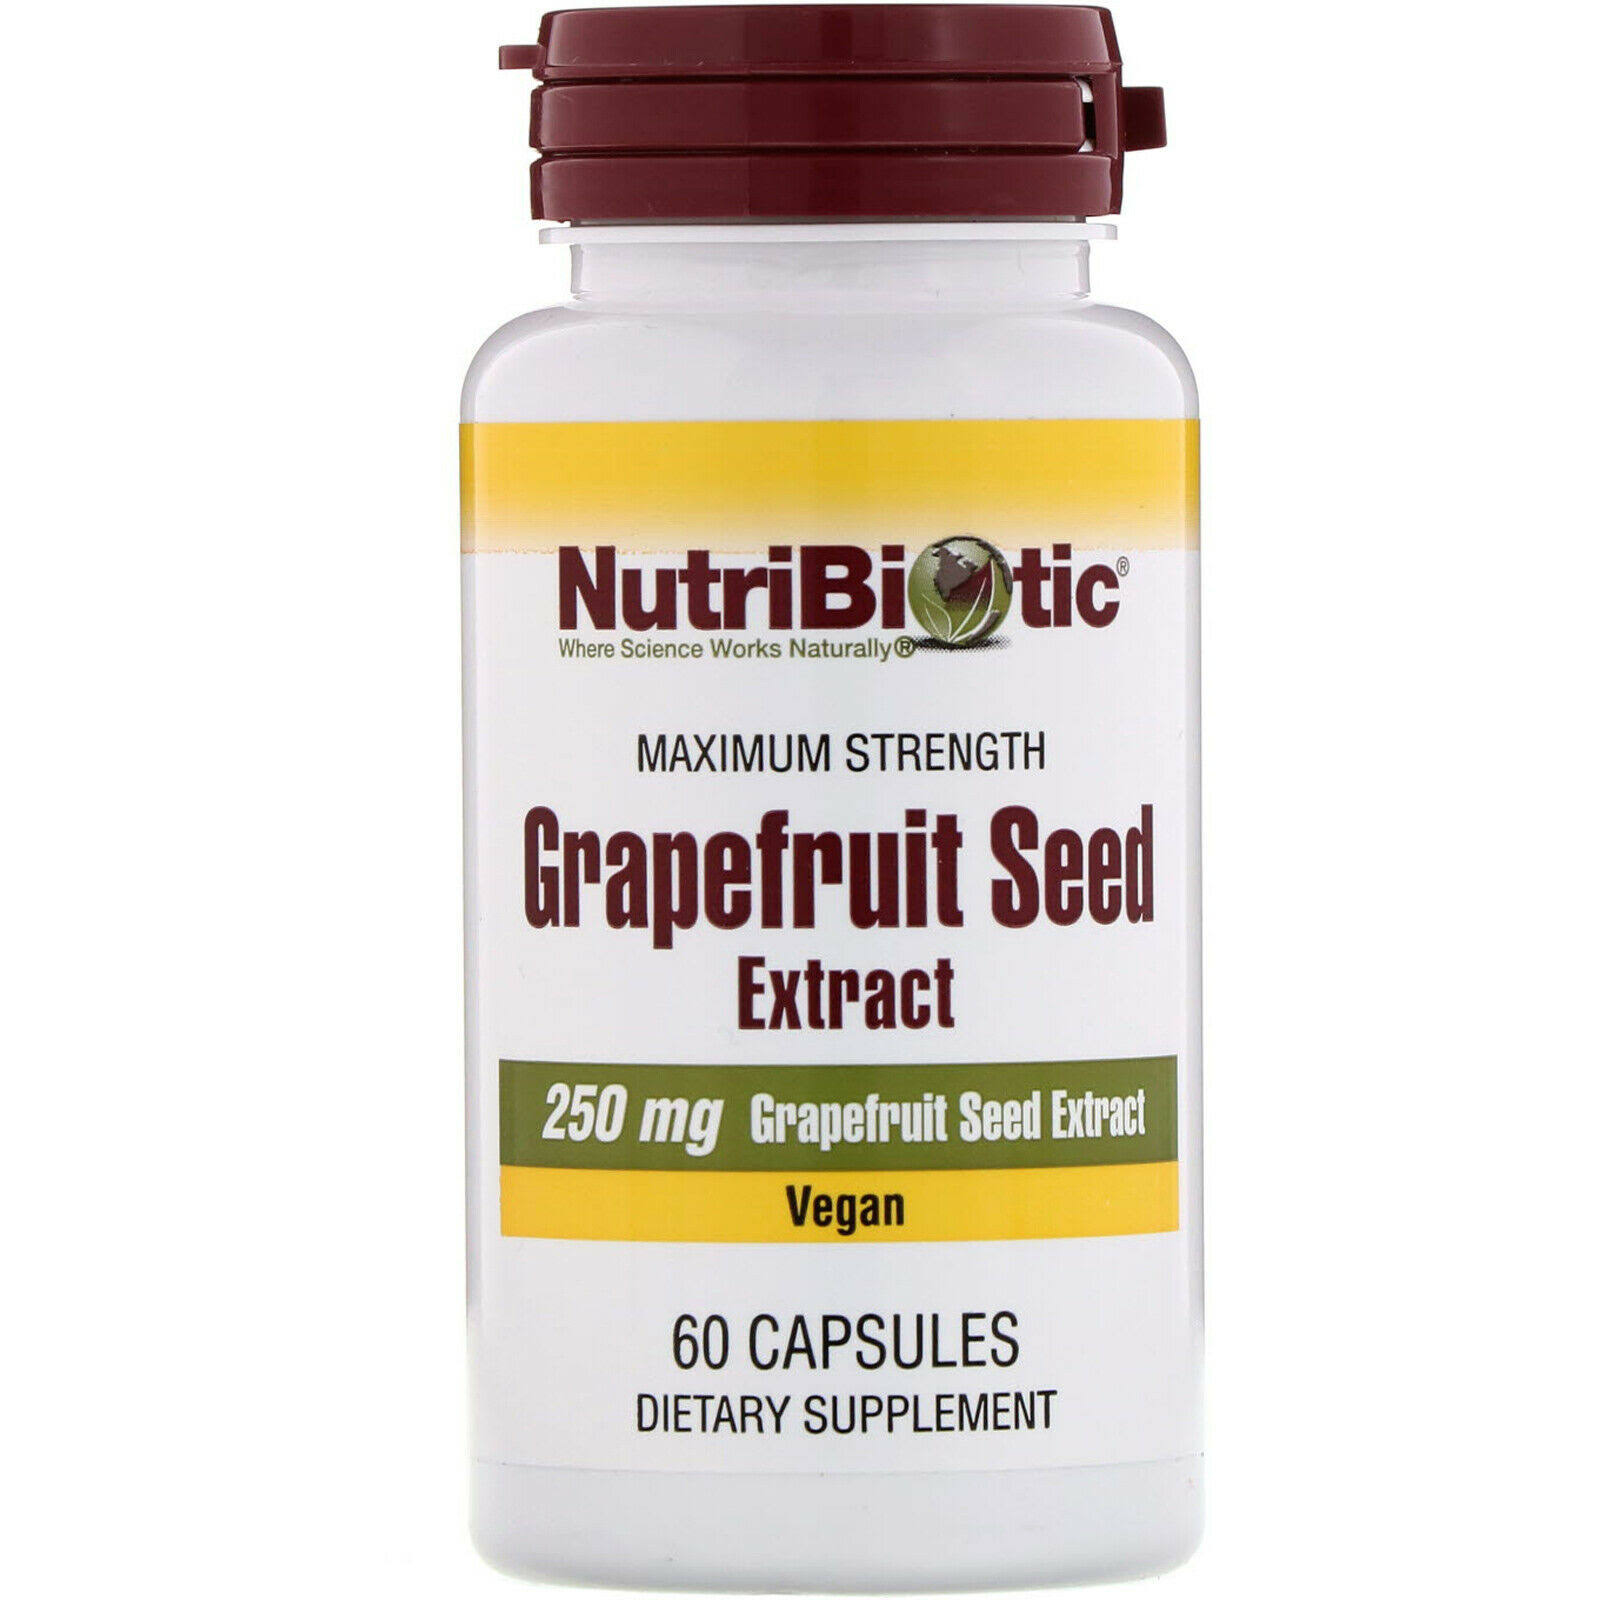 NutriBiotic Grapefruit Seed Extract - 60 Capsules